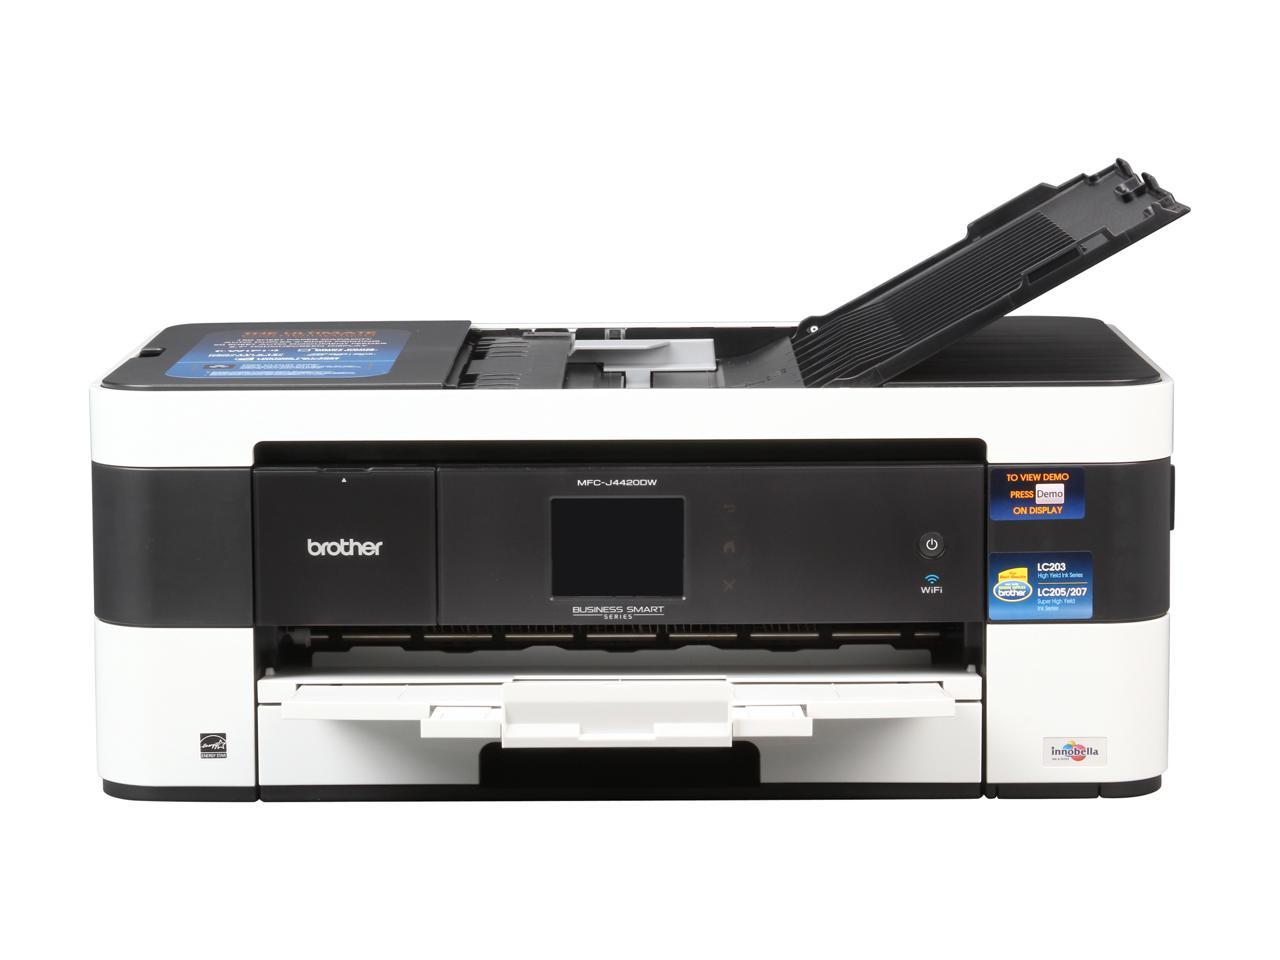 Brother Mfc J4420dw Business Smart All In One Inkjet Printer With Up To 11x17 Printing Neweggca 6514